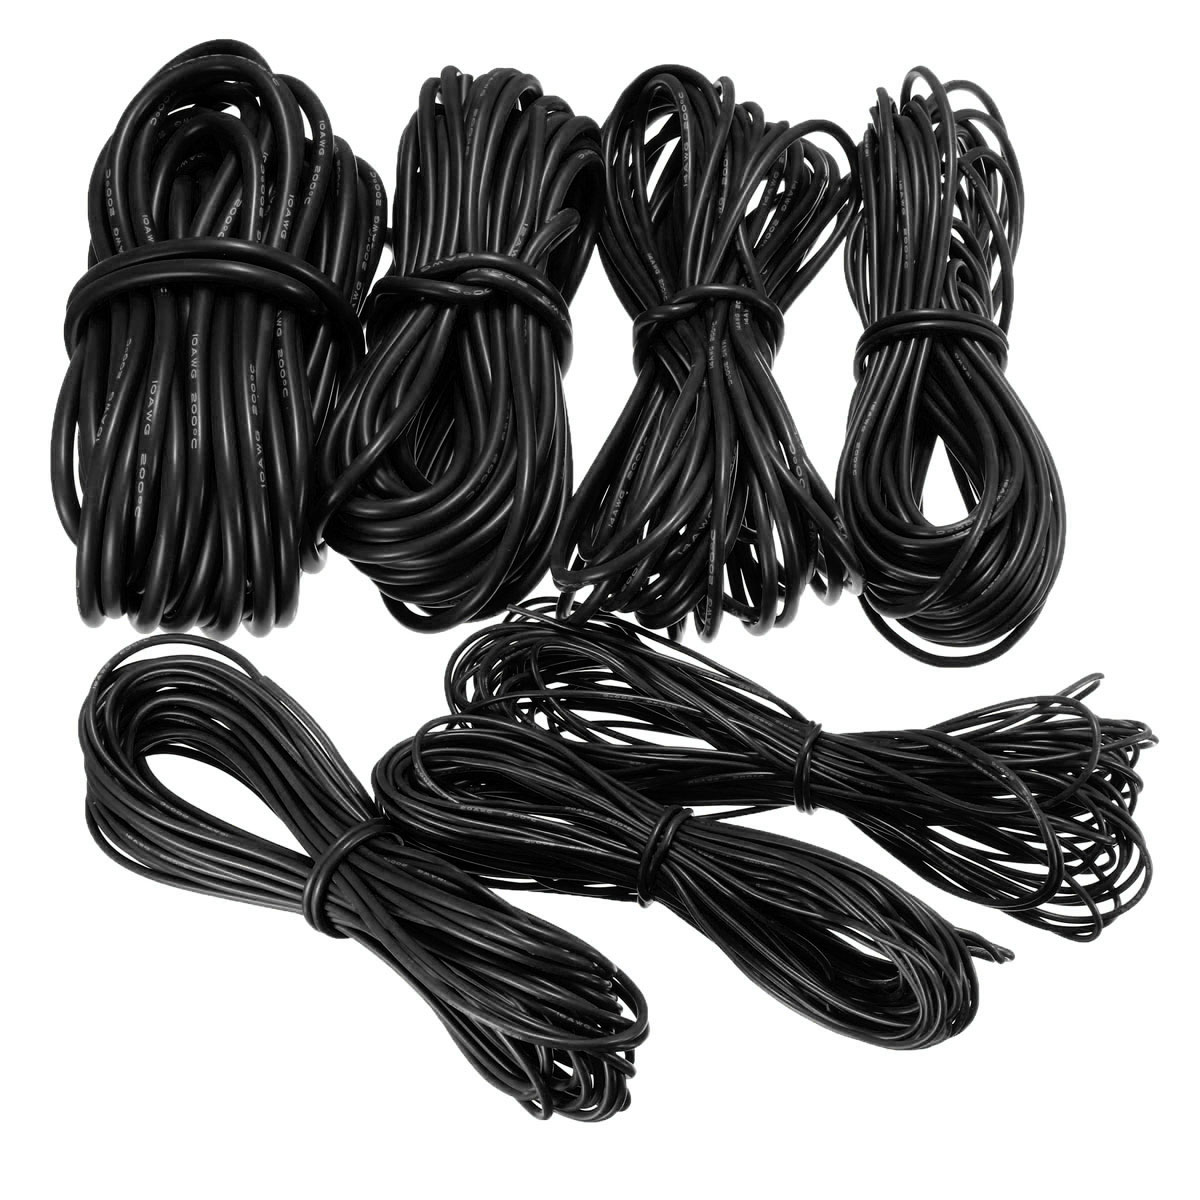 DANIU-10-Meter-Black-Silicone-Wire-Cable-10121416182022AWG-Flexible-Cable-1170303-1